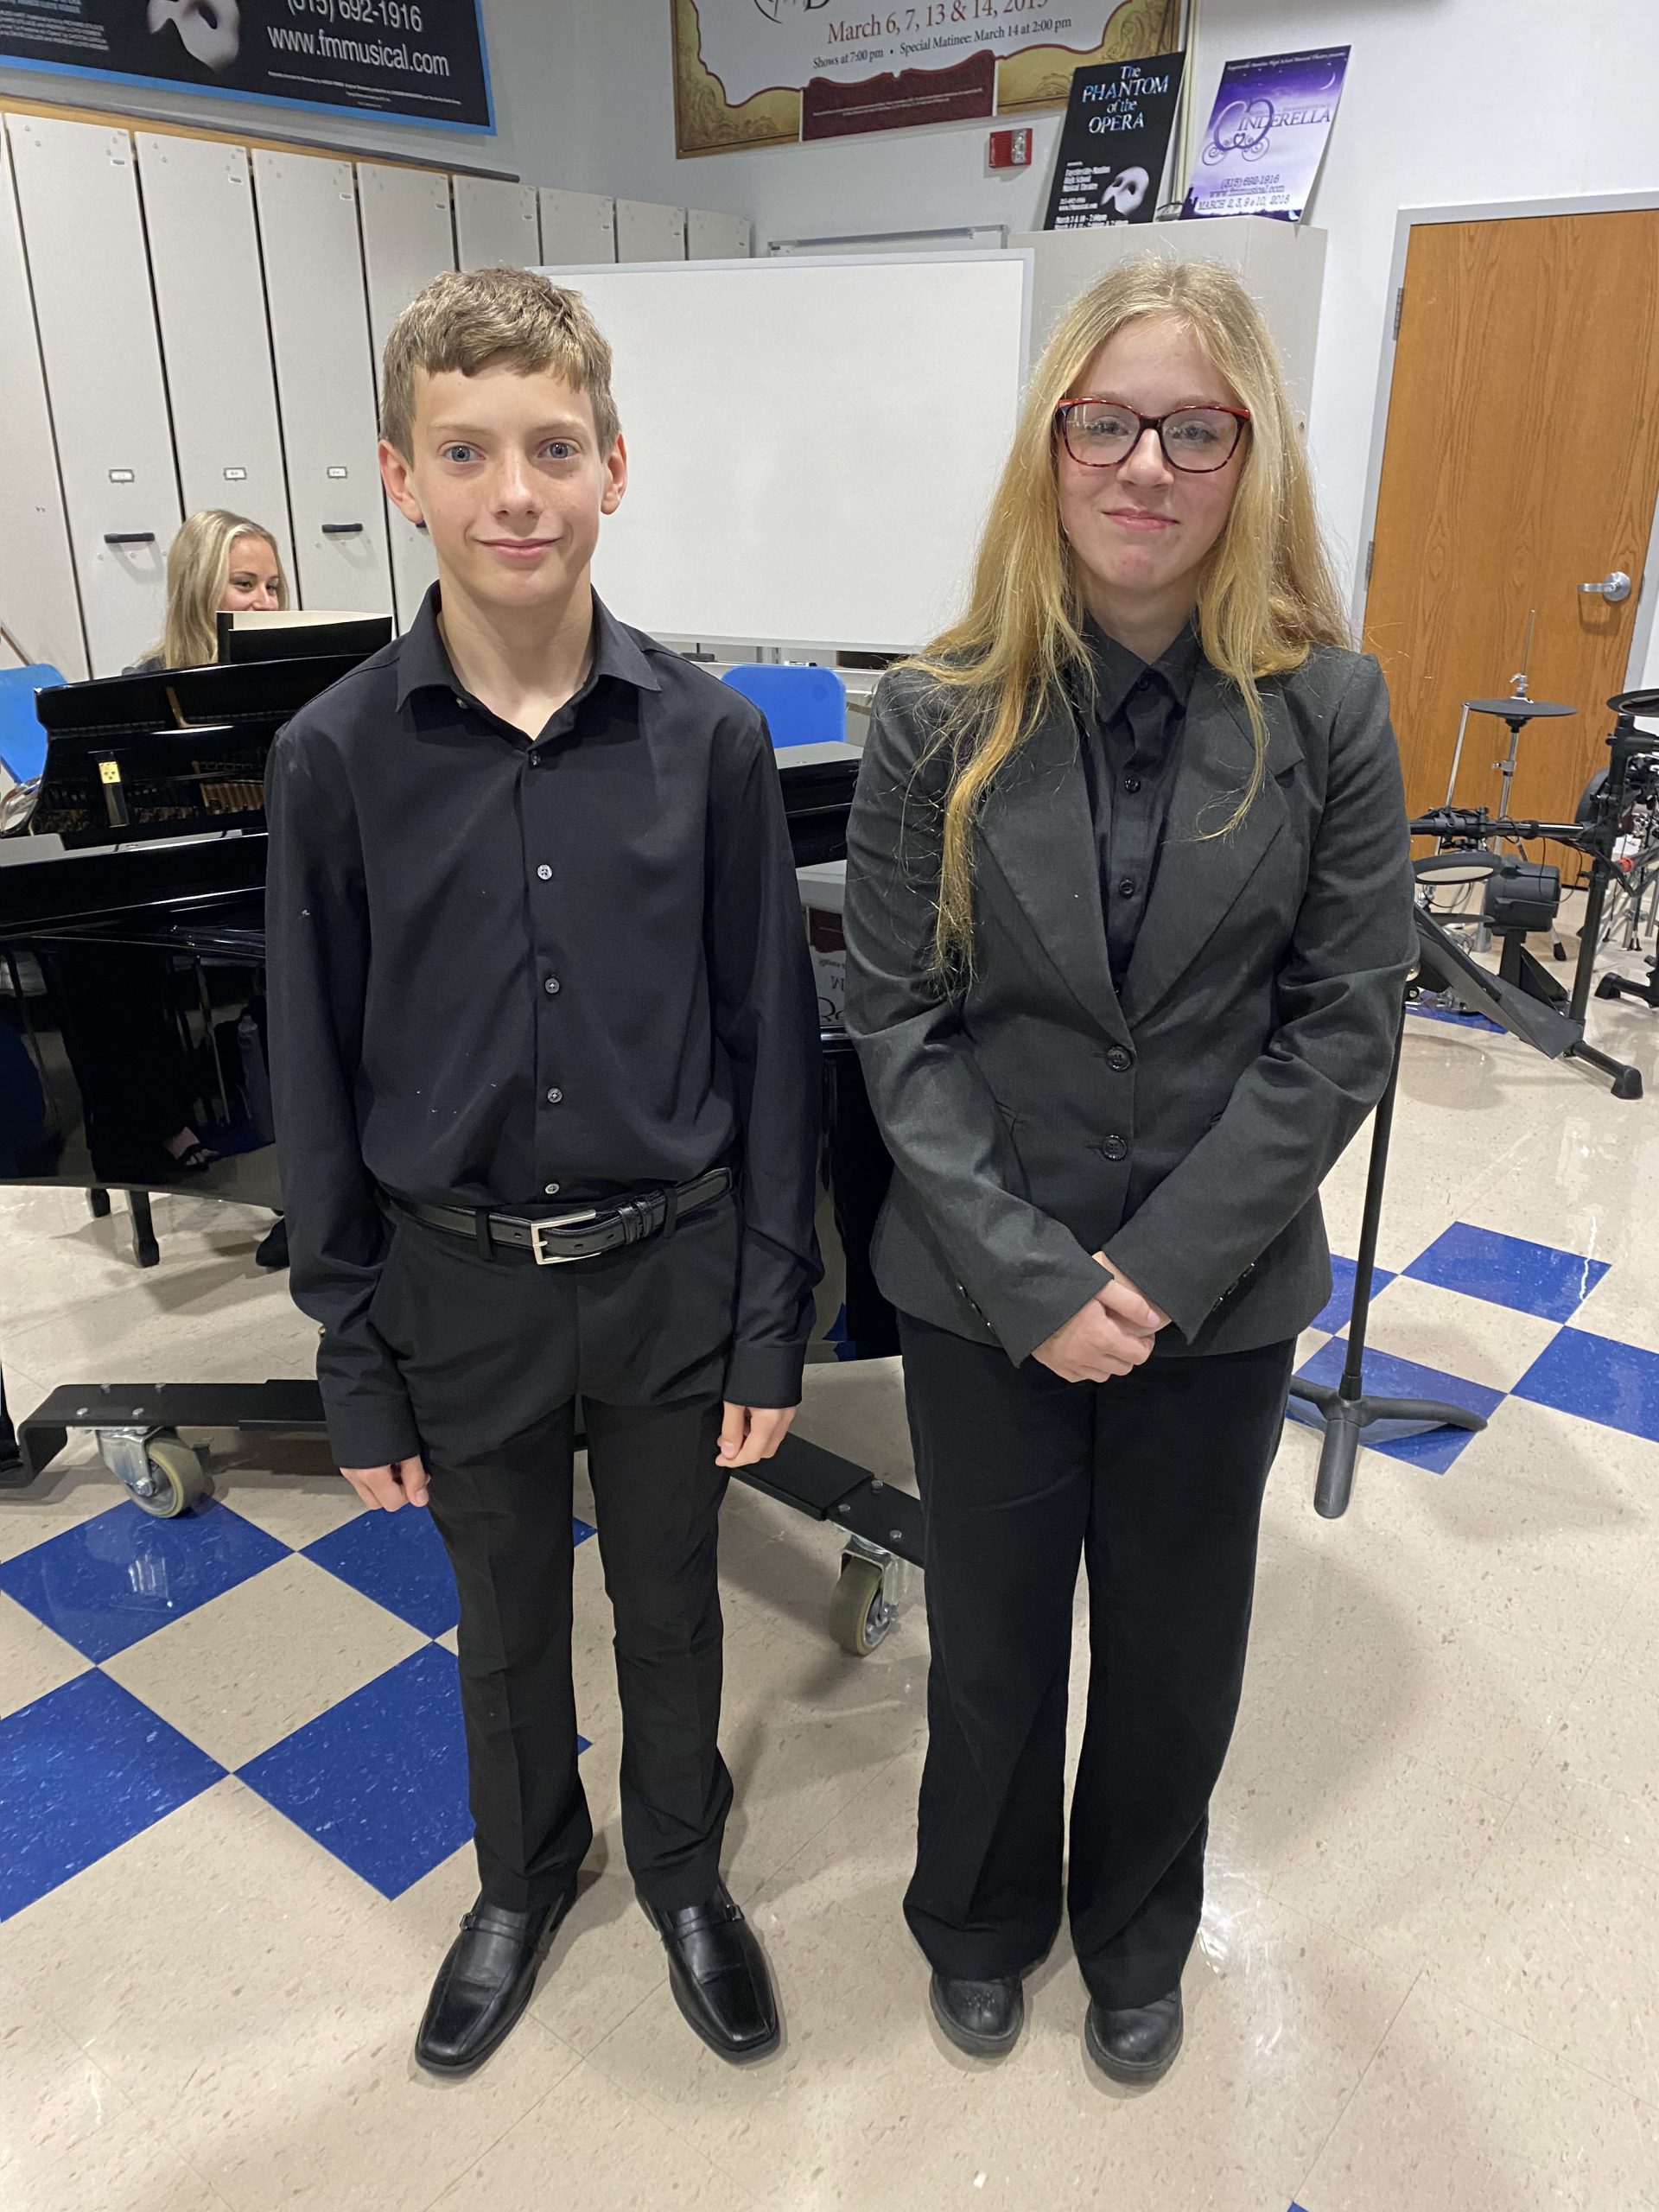 Weedsport students selected to participate in NYSSMA Area AllState